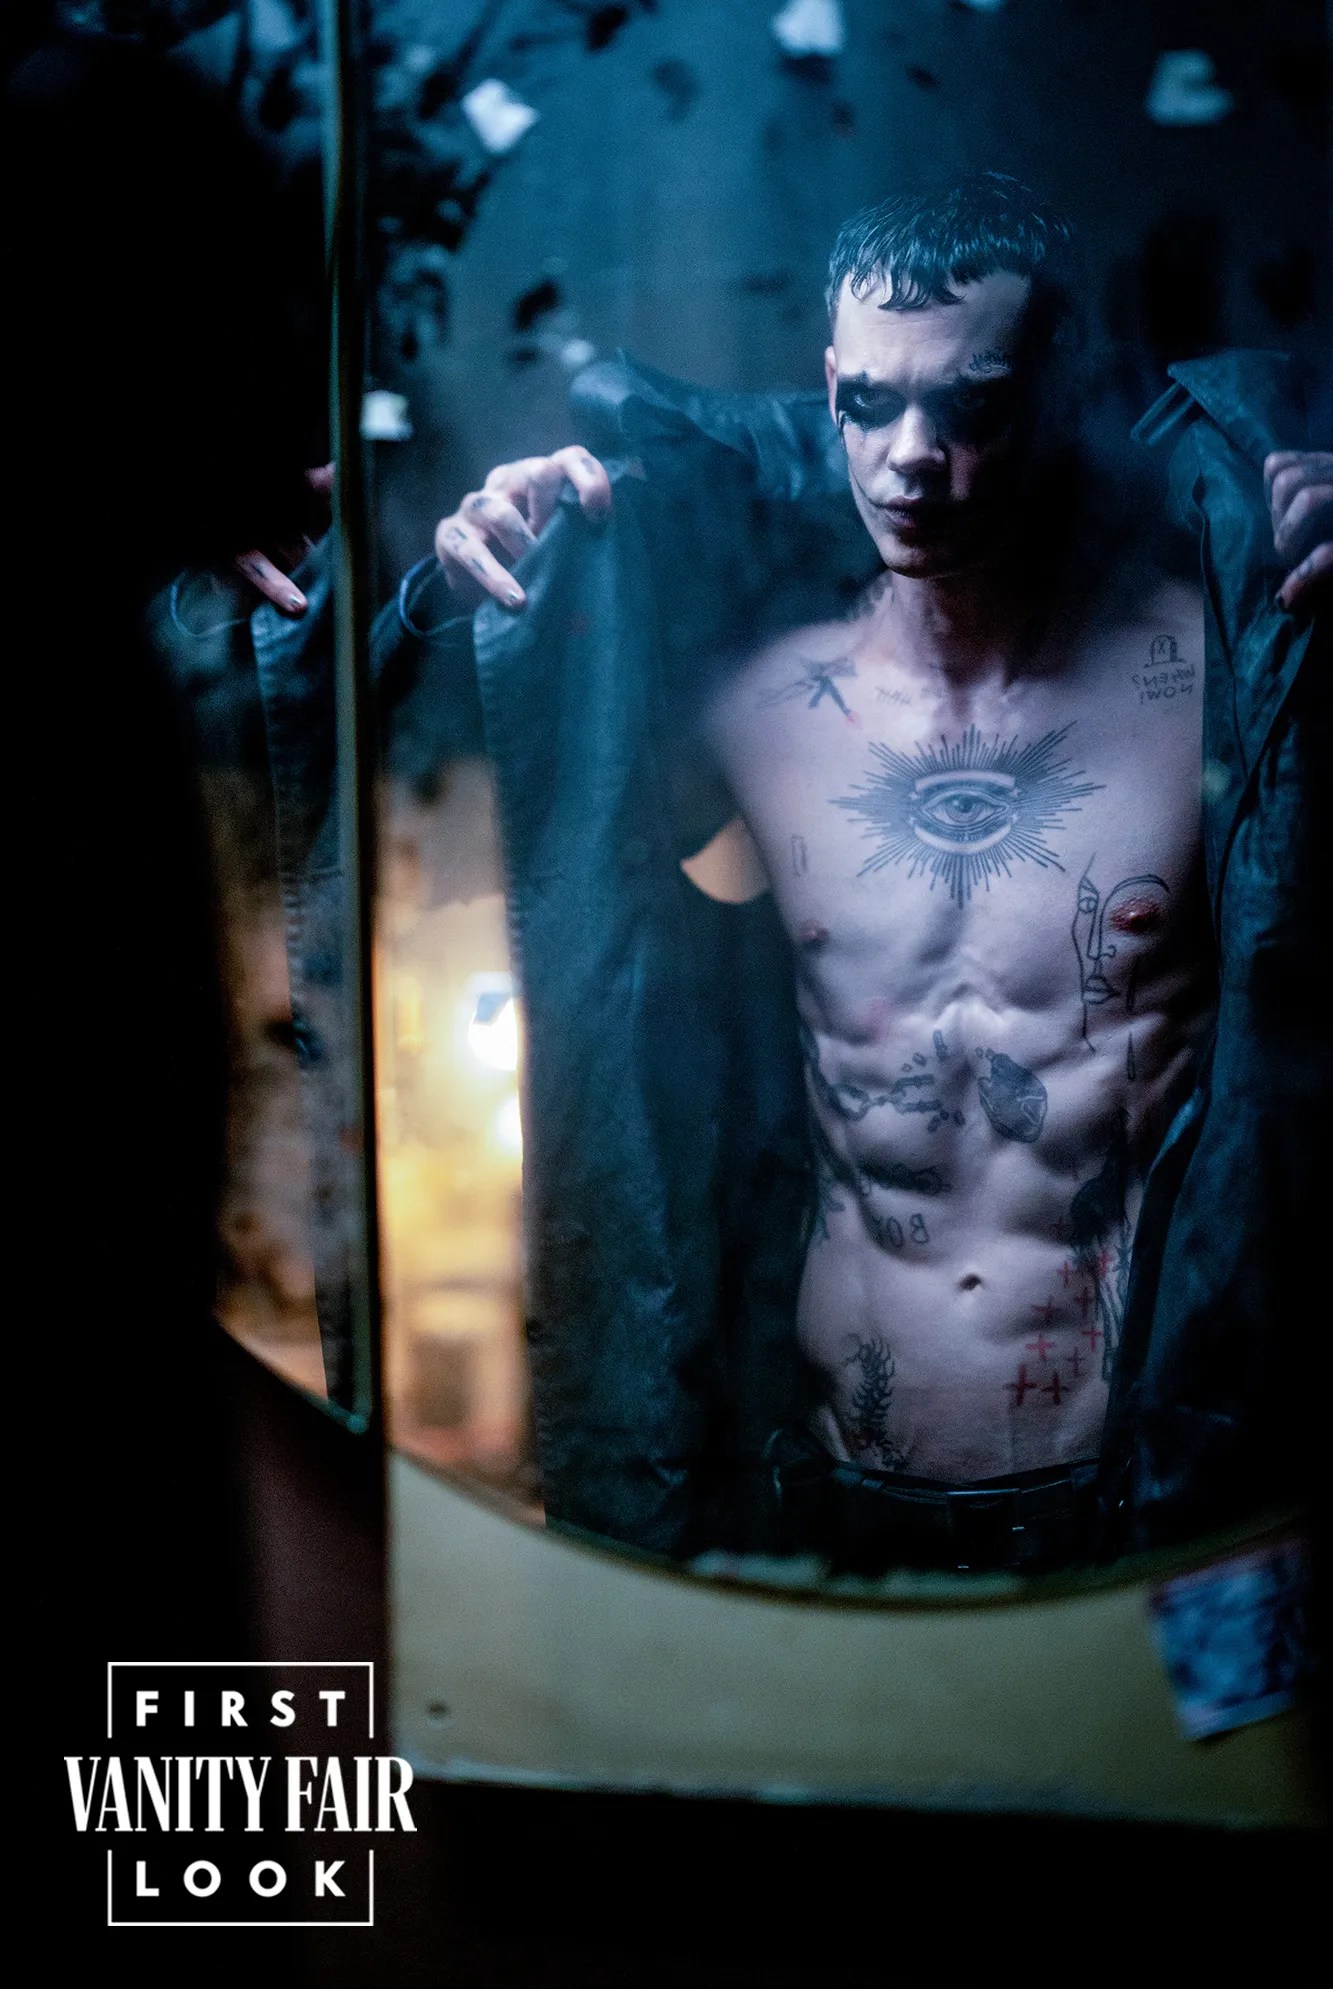 Cast, plot and further details about the new edition of “The Crow” with Bill Skarsgård